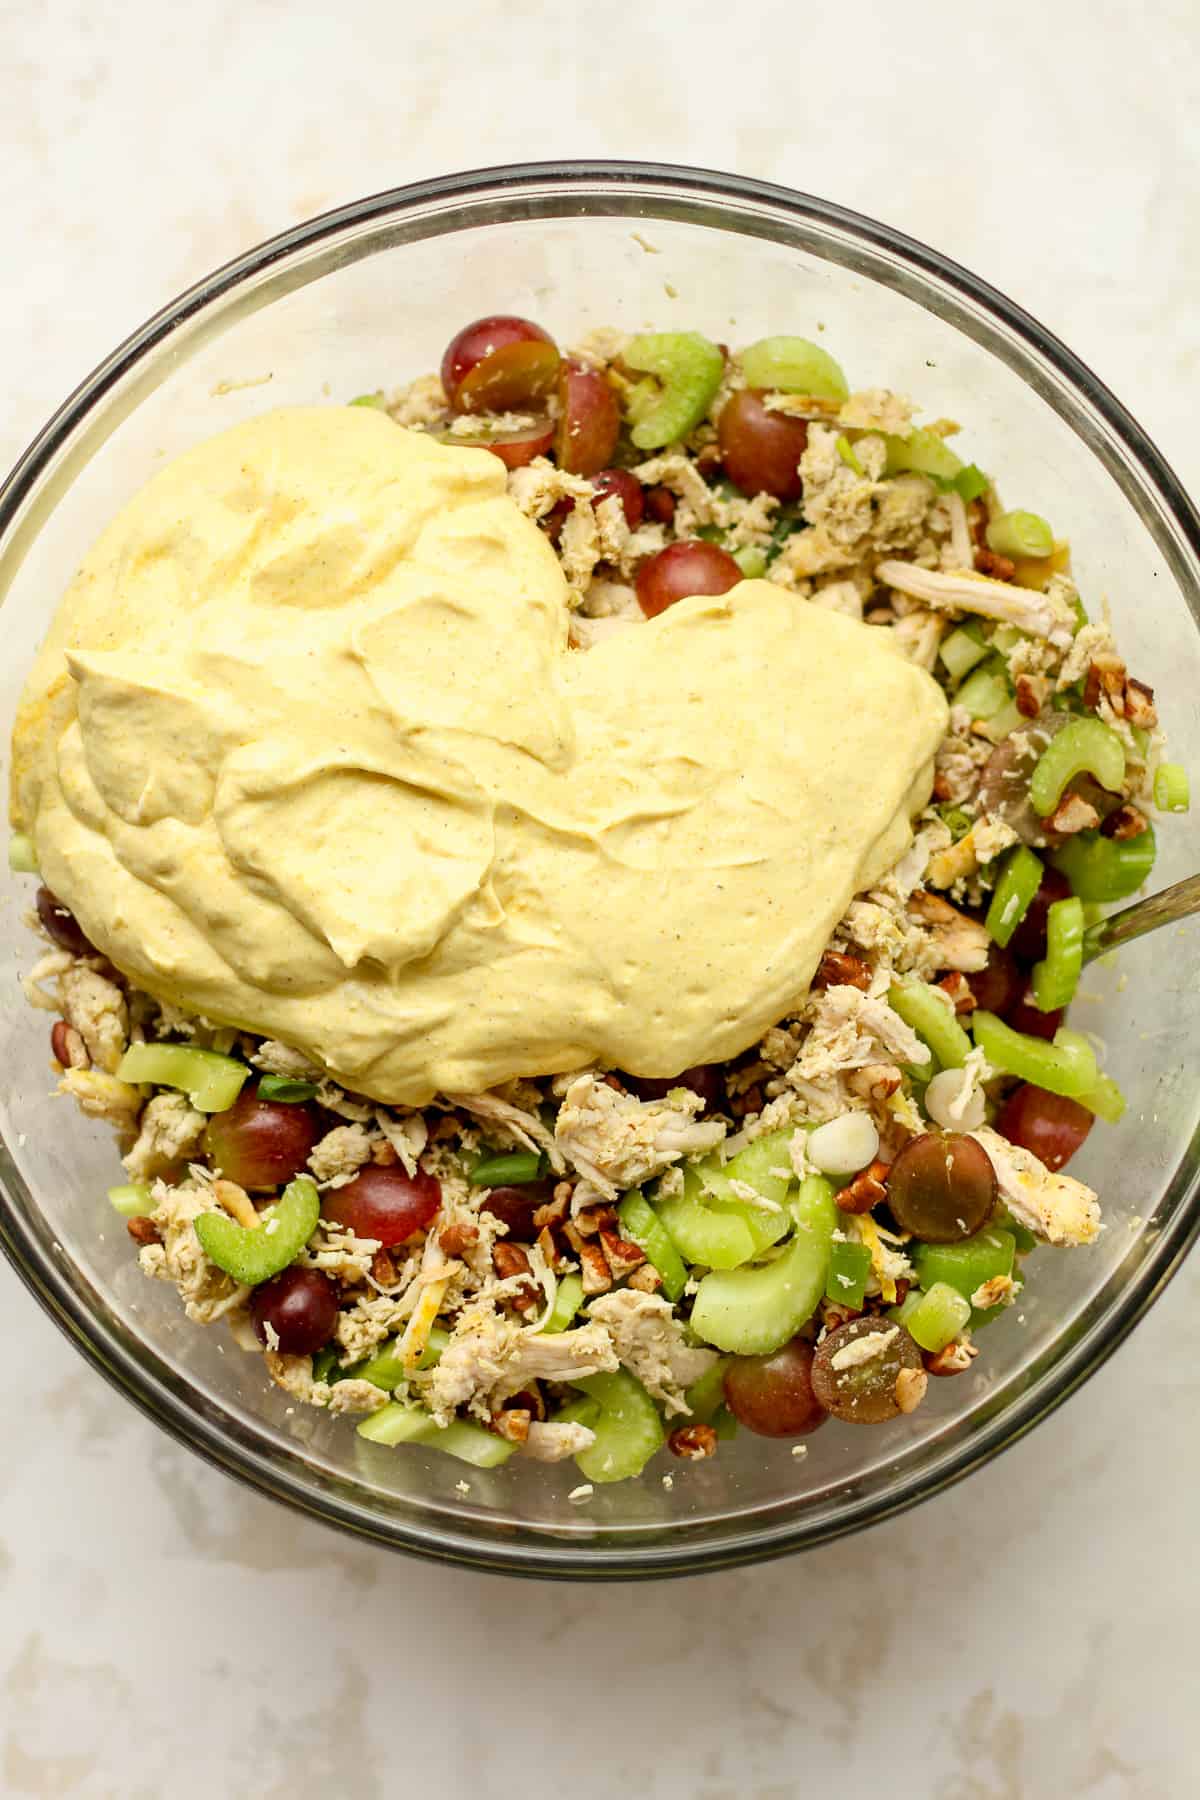 A bowl of the chicken salad with the dressing on top.